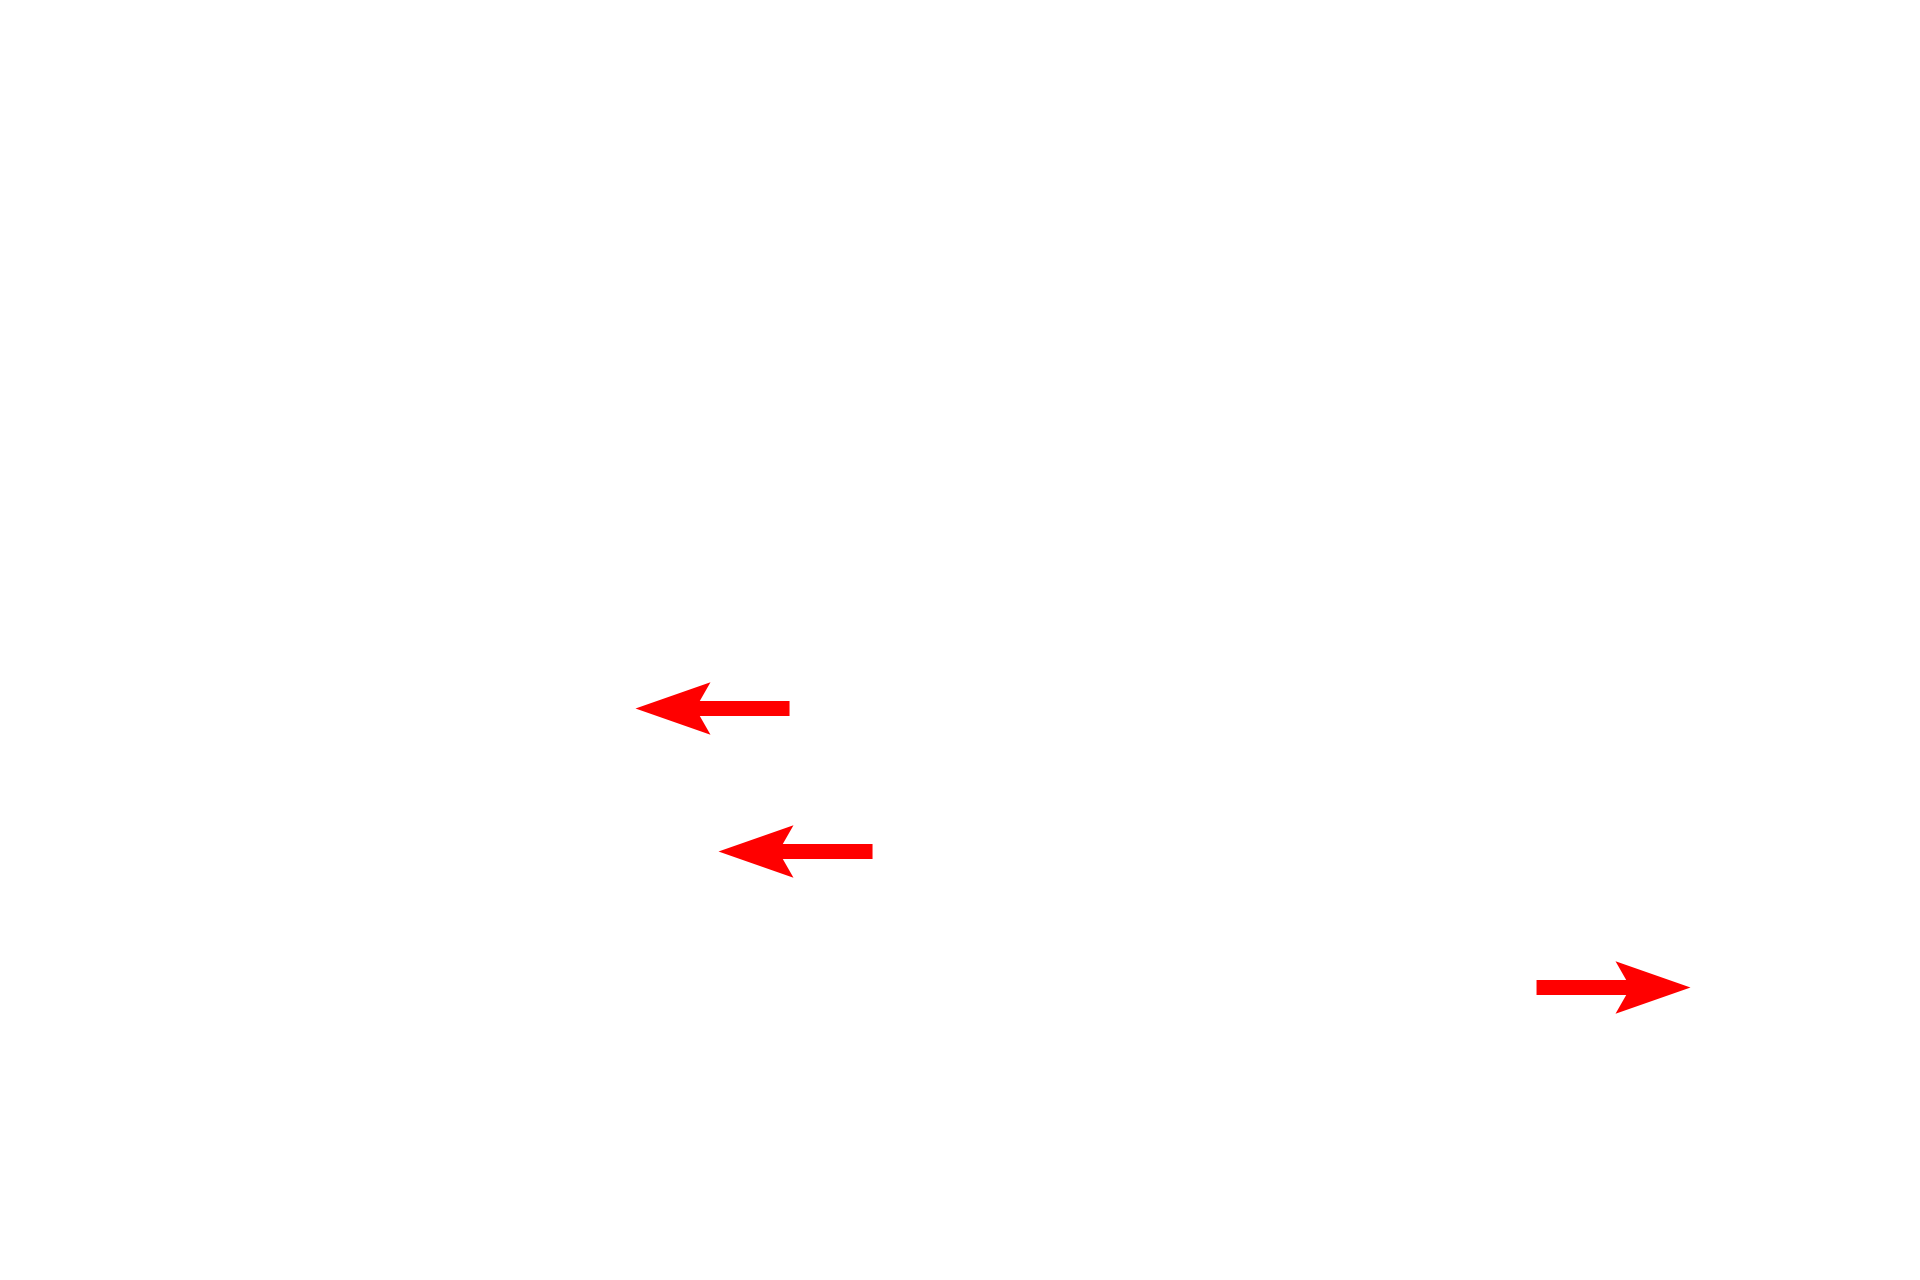  - Fenestrations and discontinuities <p>Sinusoids, discontinuous capillaries, are lined by a fenestrated endothelium with additional gaps between adjacent cells.  The discontinuous basal lamina allows easy access between the sinusoid and the space of Disse, located between sinusoids and adjacent hepatocytes.  Kupffer cells (liver macrophages) span sinusoids, phagocytosing aged erythrocytes and debris.  5000x</p>
